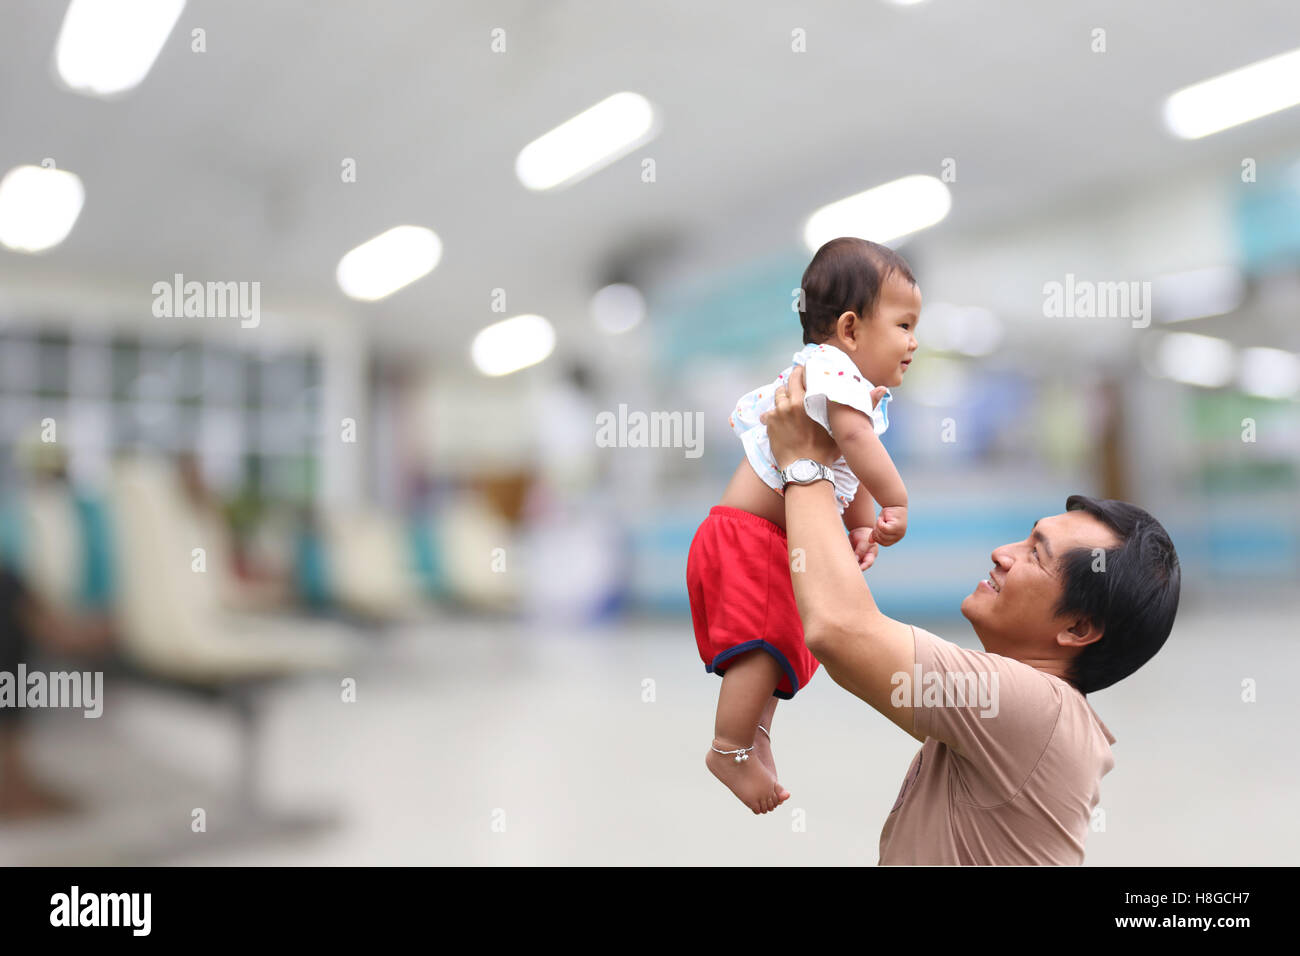 Man were holding a baby to holds up and blurred hospital background,concept of love in the family. Stock Photo